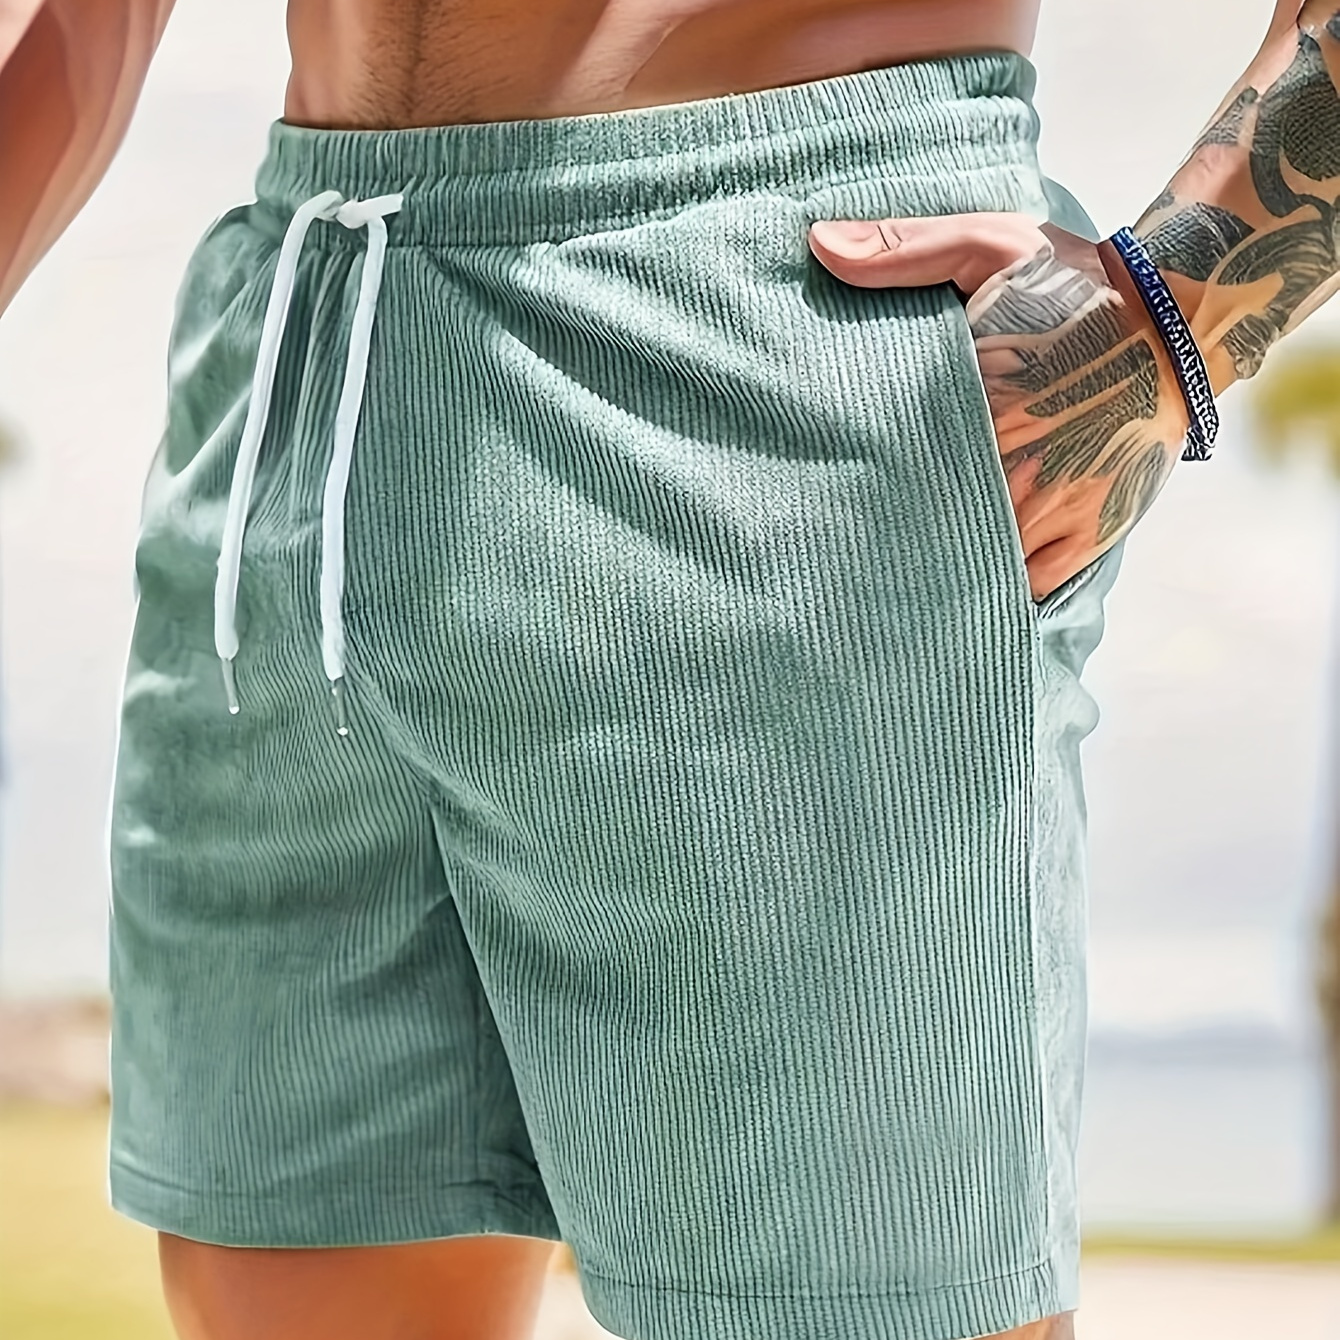 

Men's Solid Corduroy Shorts With Pockets, Casual Elastic Waist Drawstring Shorts For Summer